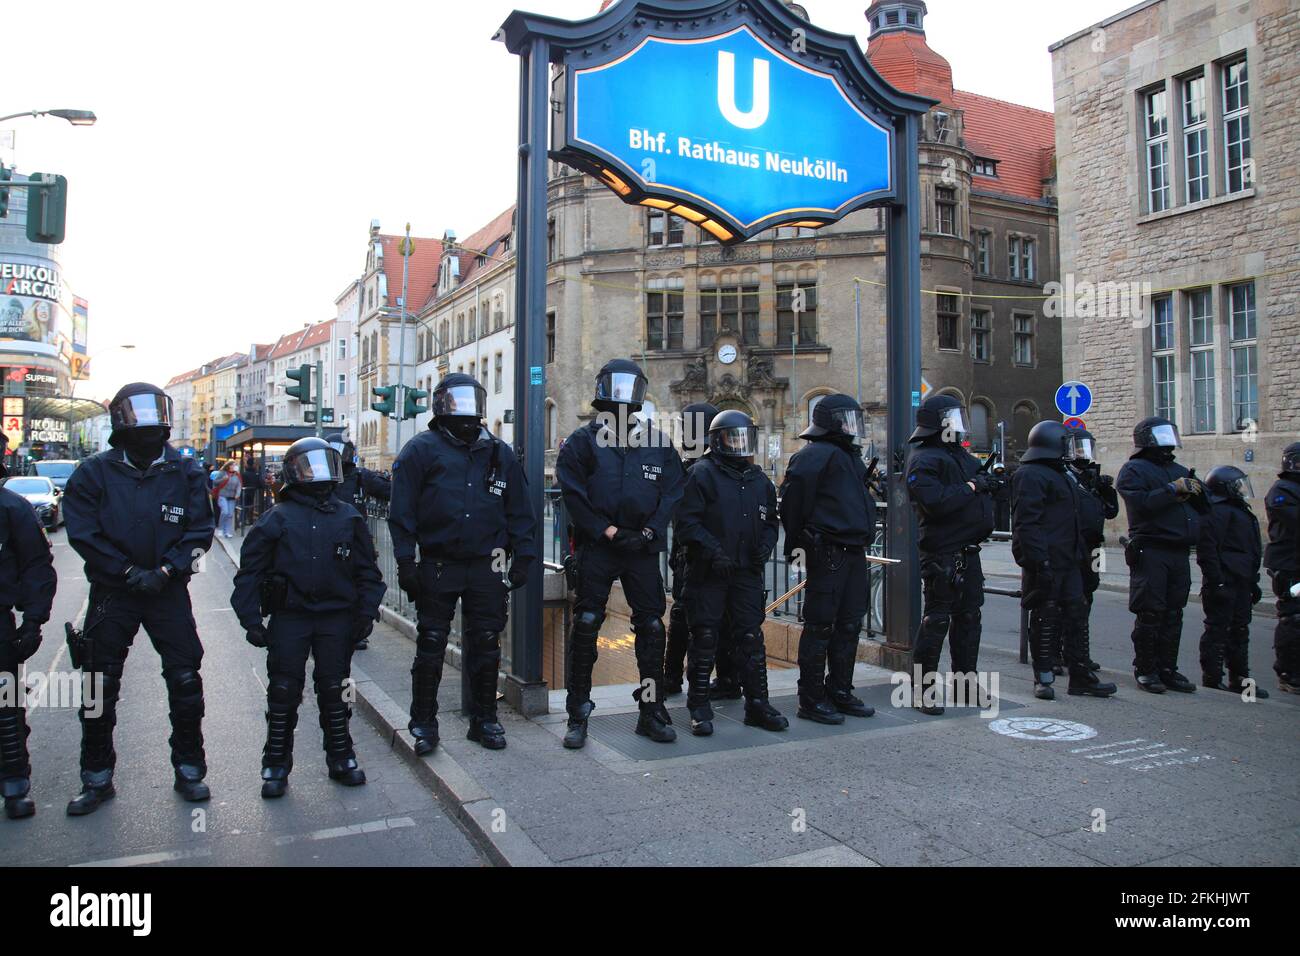 Berlin, Germany - May 01, 2021: Police team on street at myfest celebration on mayday. May Day in Berlin Neukölln refers to the street festivals and d Stock Photo